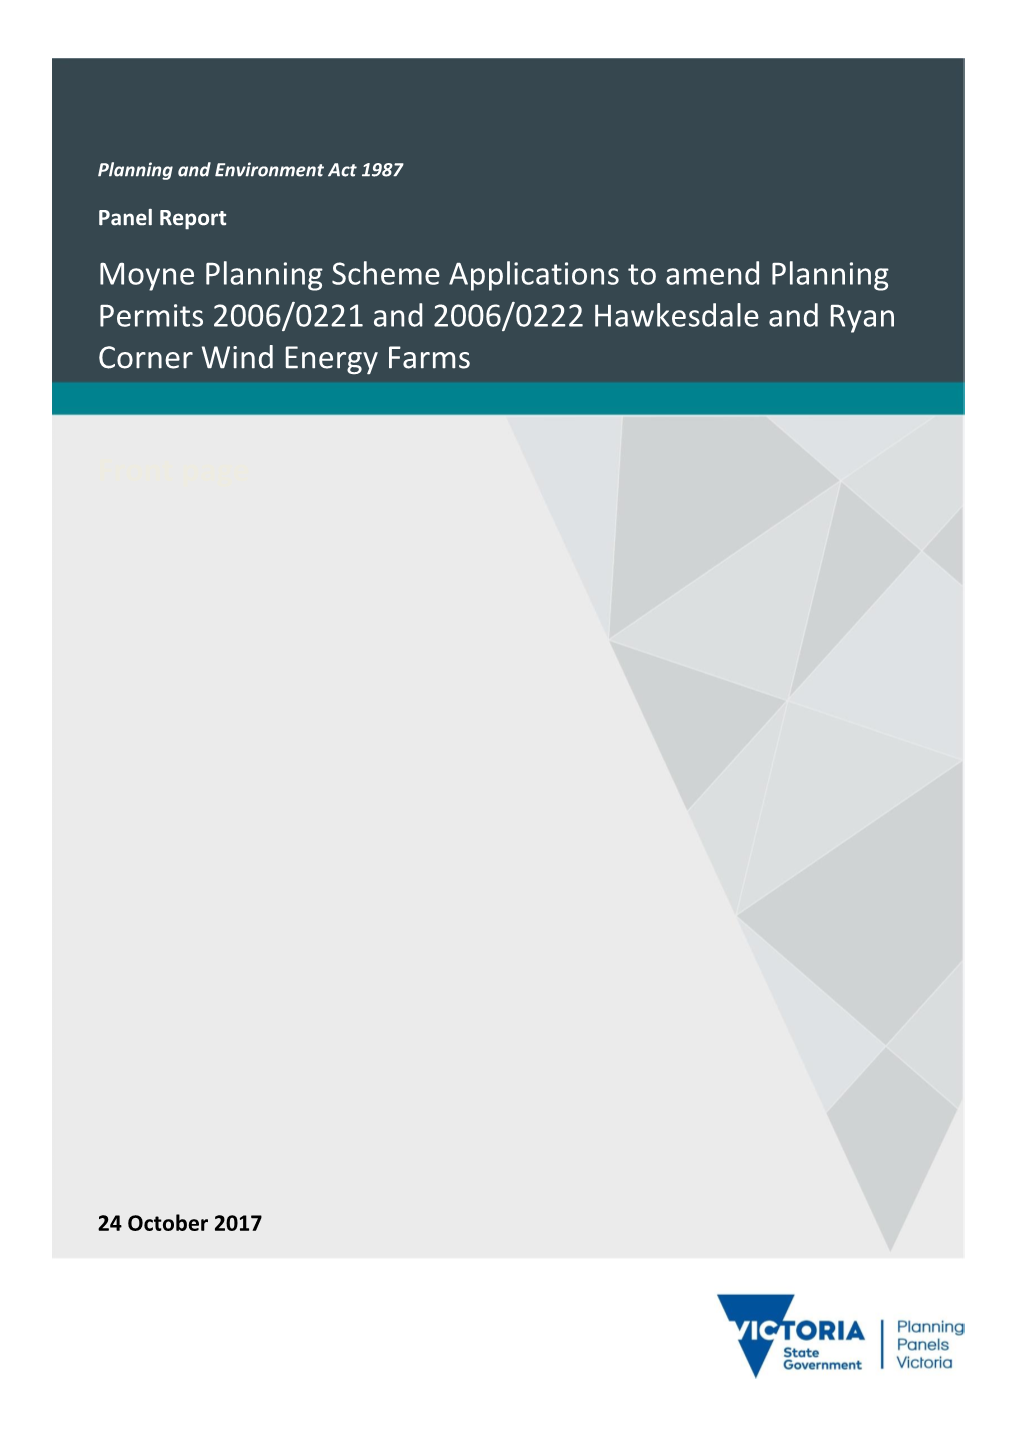 Panel Report Moyne Planning Scheme Applications to Amend Planning Permits 2006/0221 and 2006/0222 Hawkesdale and Ryan Corner Wind Energy Farms